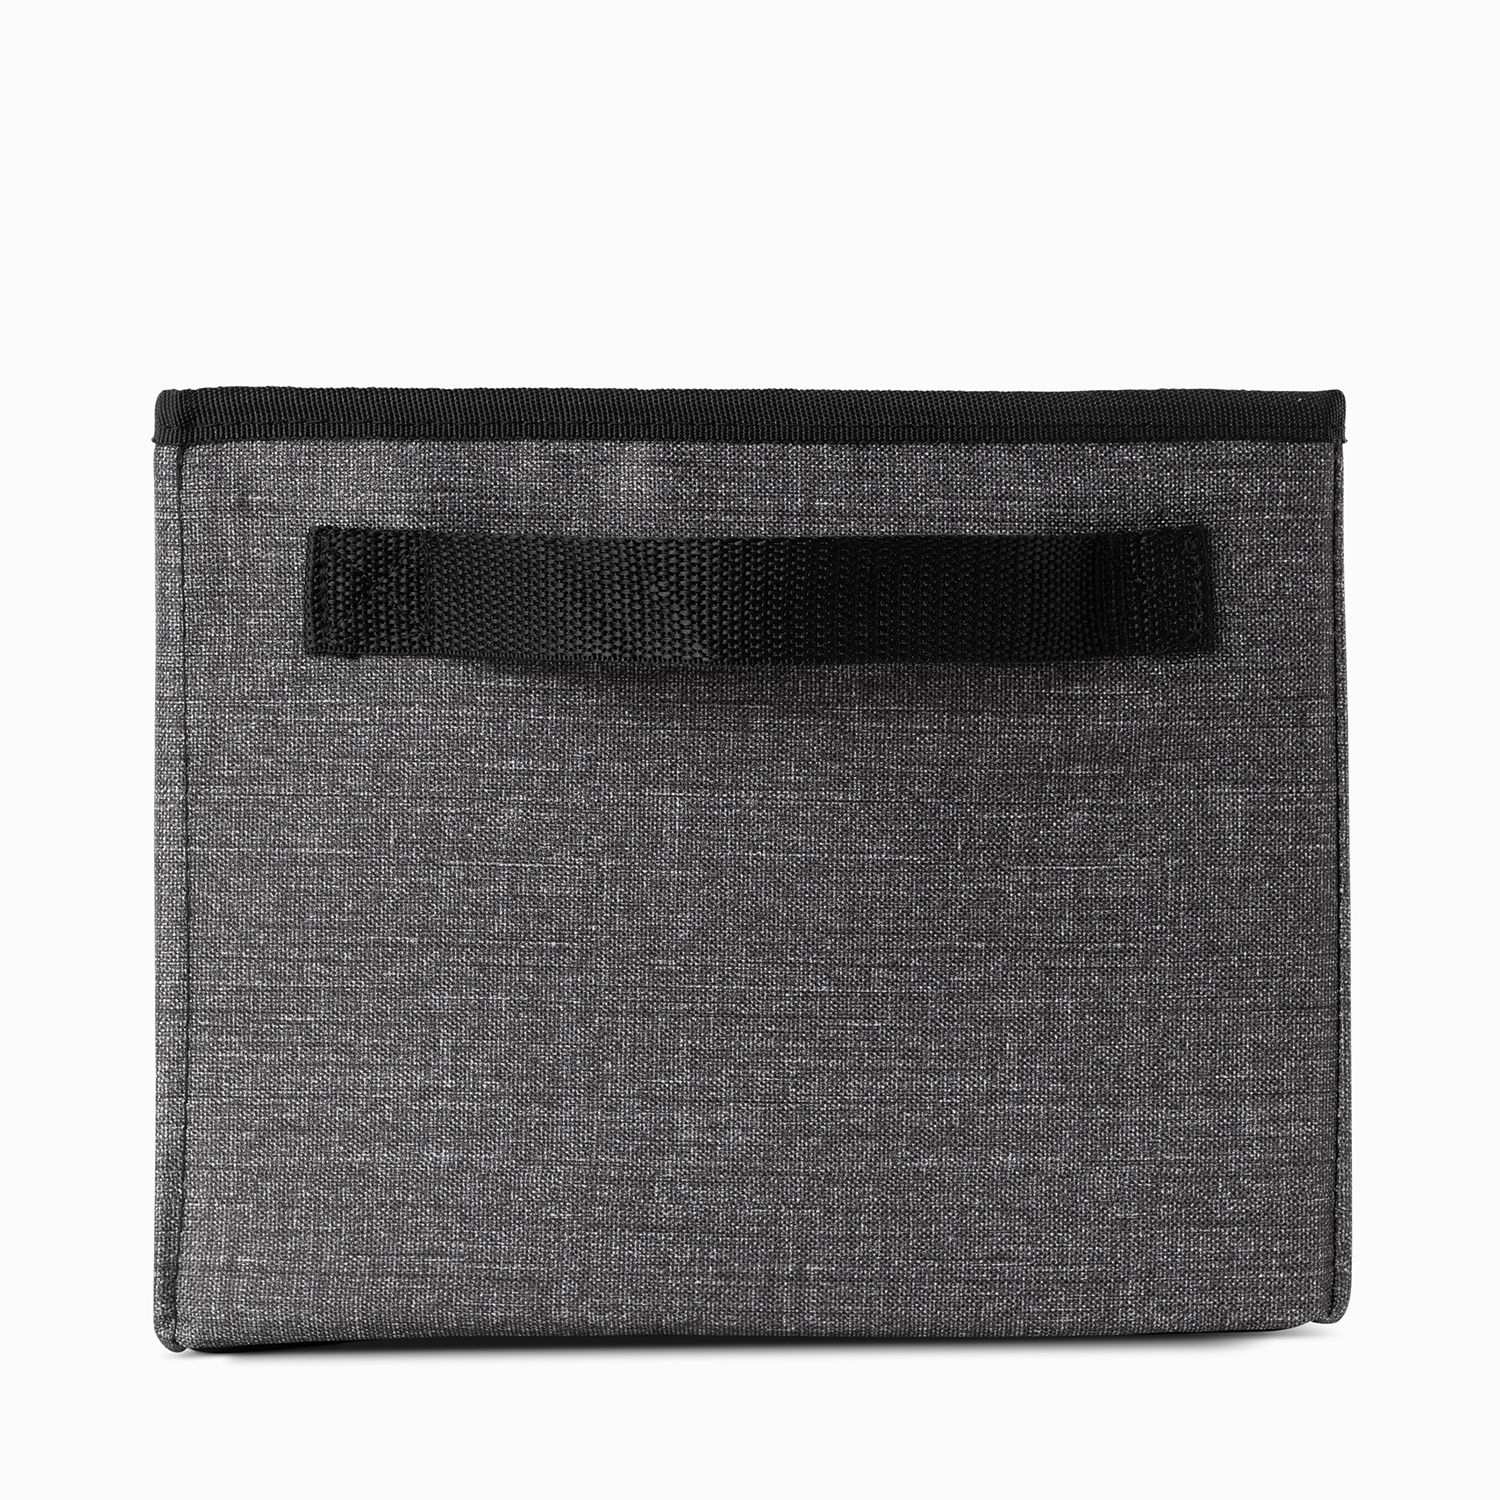 Steel Gray Crosshatch with Black Trim Collapsible Haul-It-All